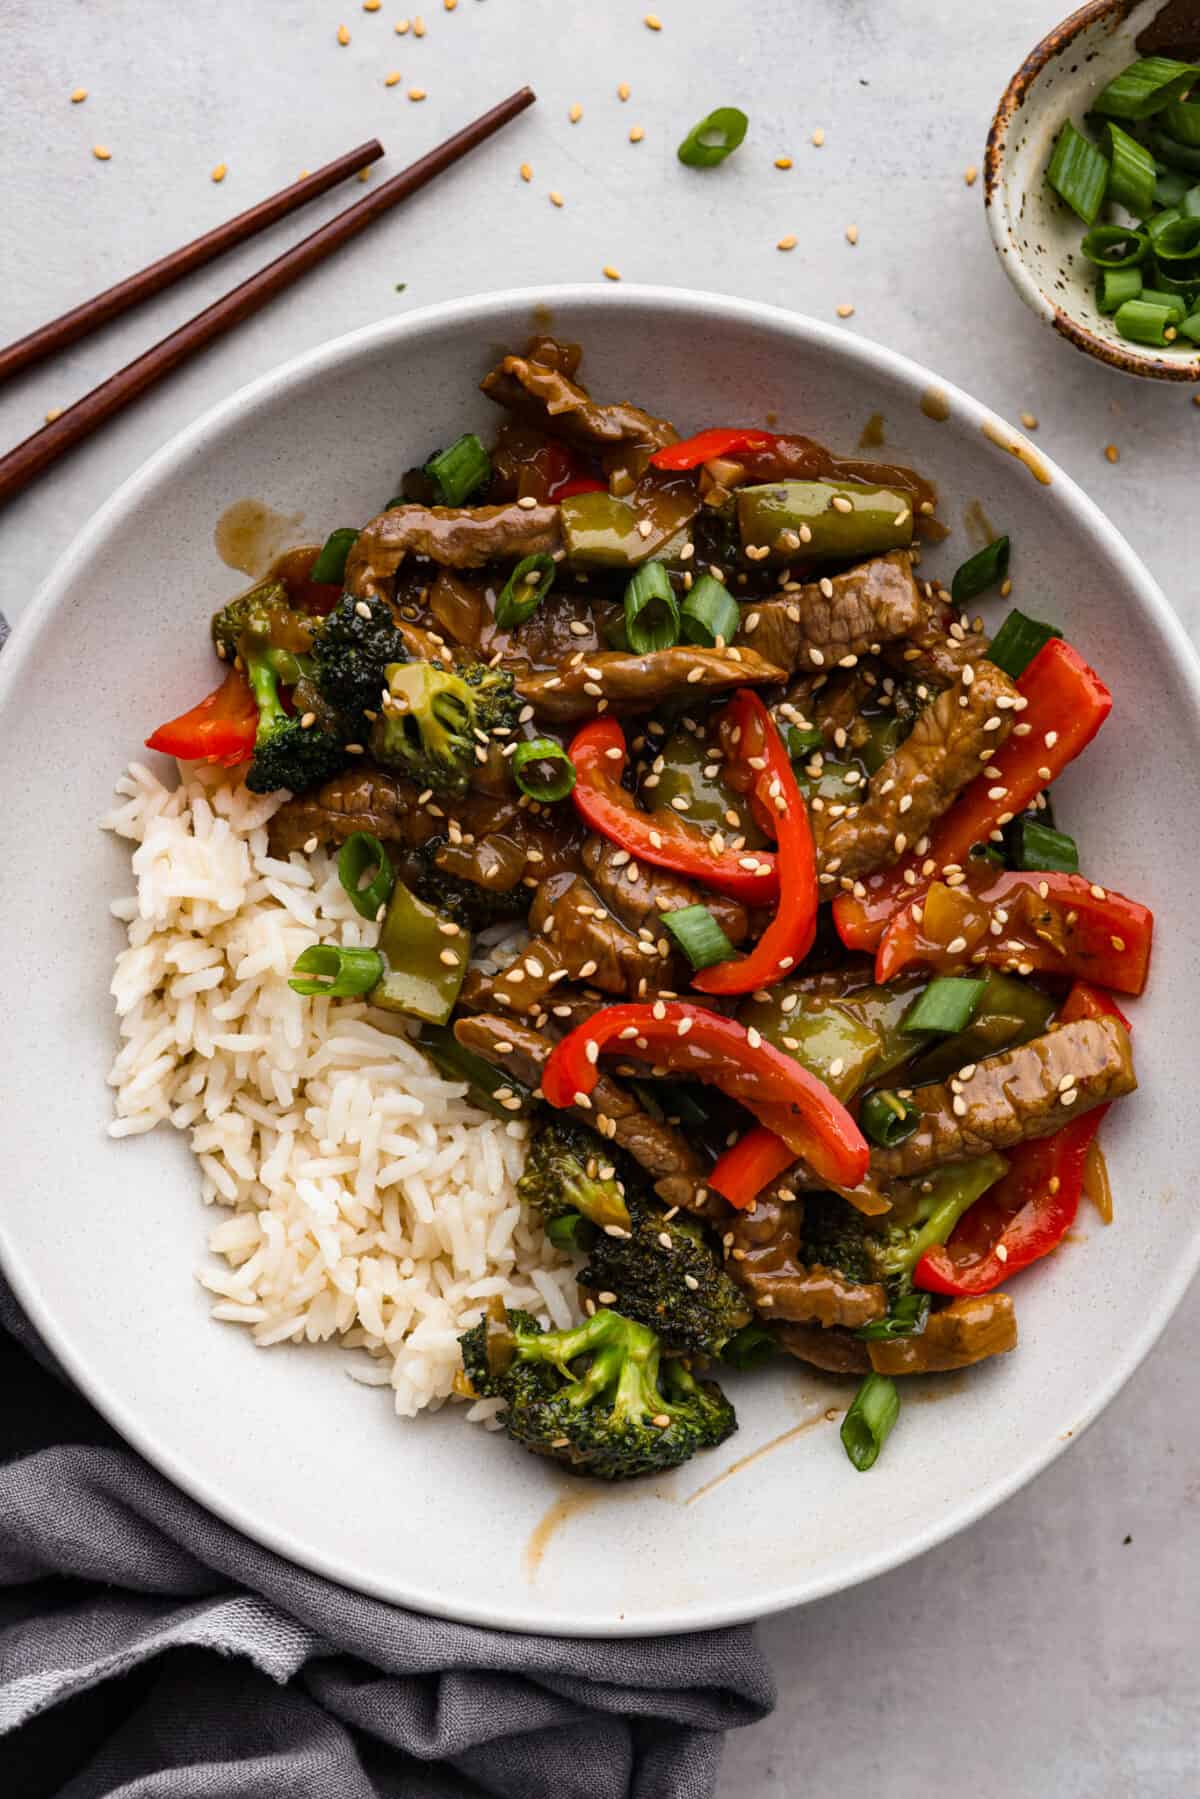 Szechuan beef and veggies served with rice in a white bowl.